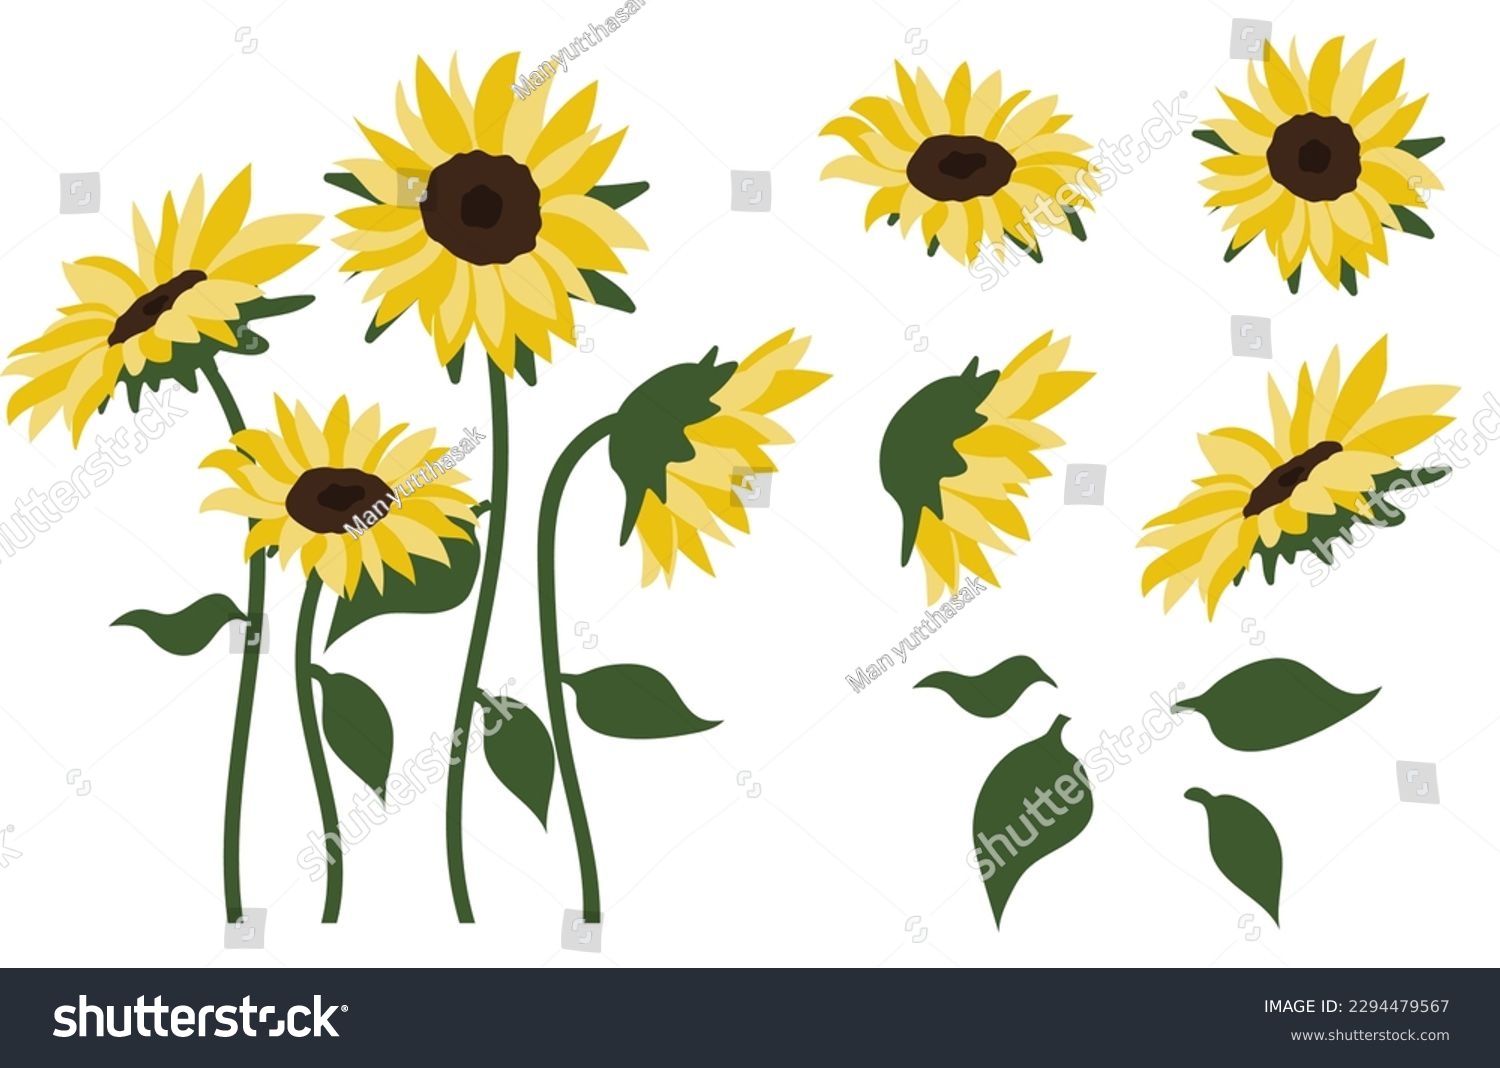 SVG of sunflower isolated on white background.Eps 10 vector. svg